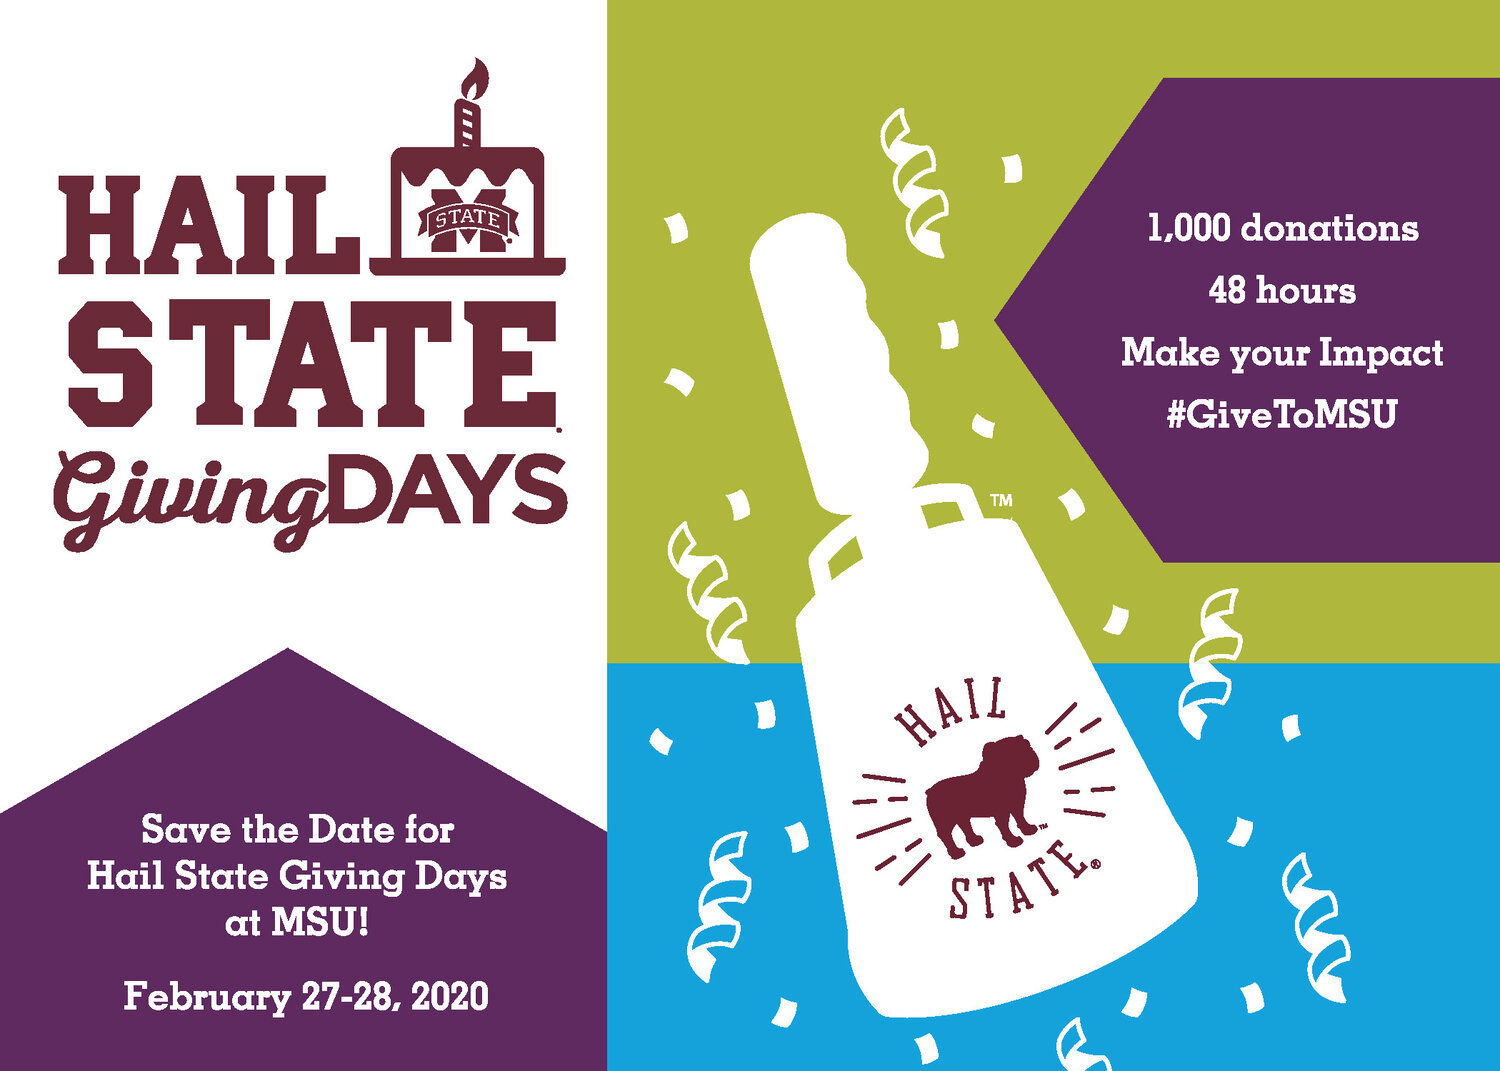 Promotional graphic for Hail State Giving Days